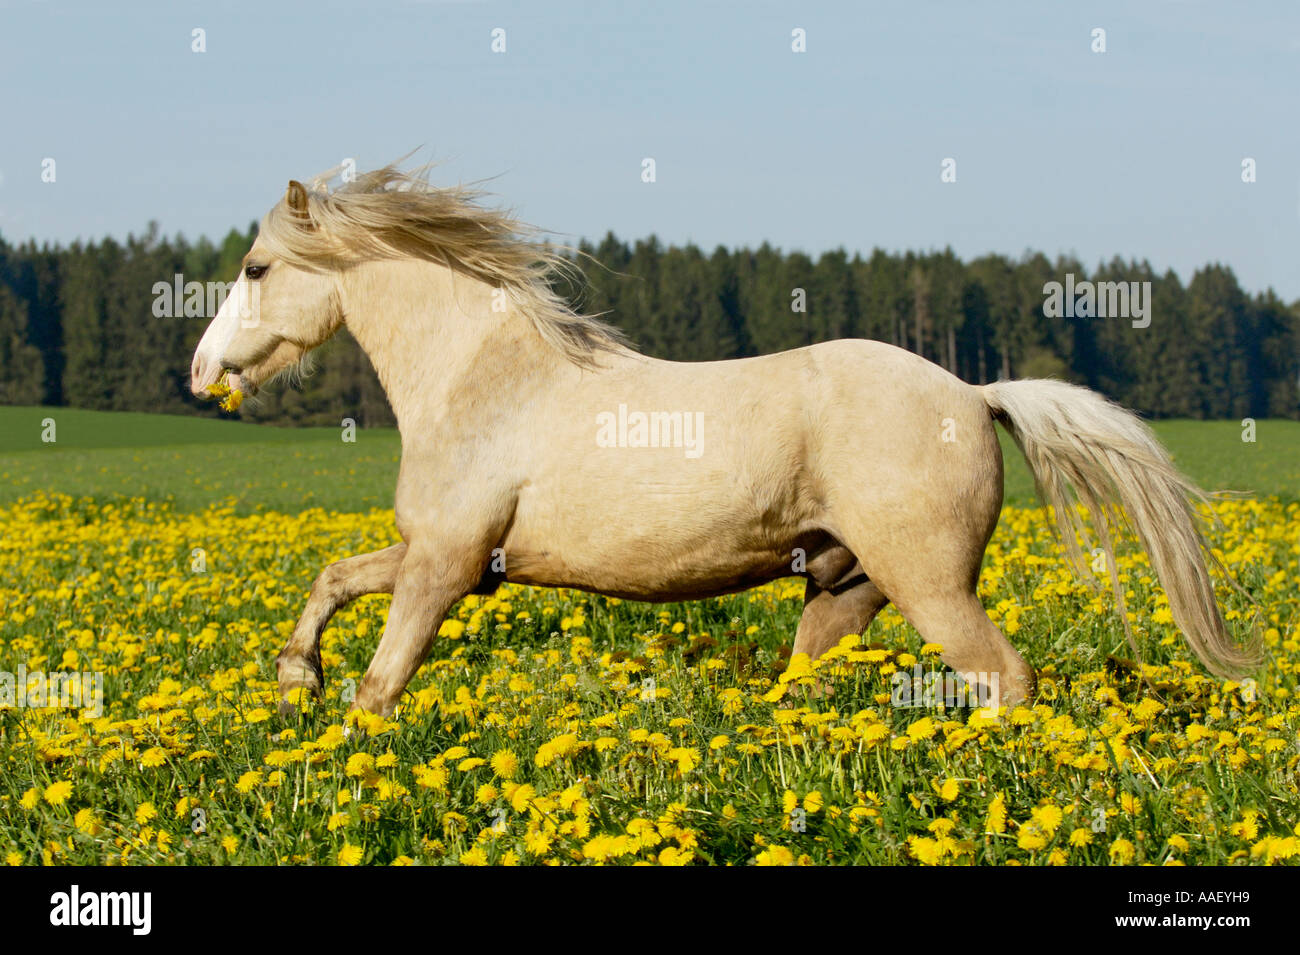 Welsh Pony galloping in a meadow full of dandelion (Southen Bavaria, Germany) Stock Photo